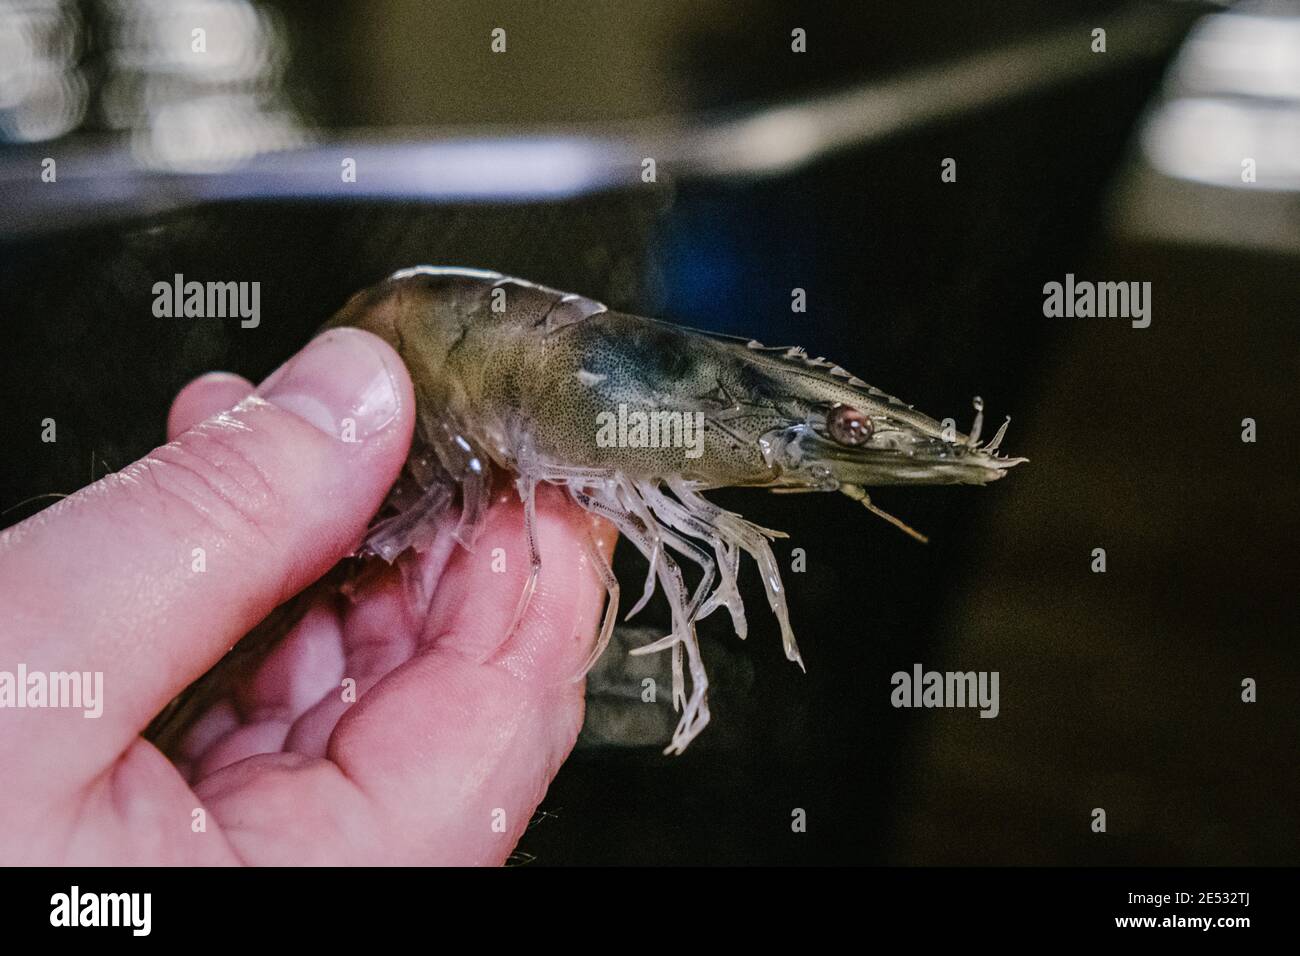 20 January 2021, Lower Saxony, Gronau (Leine): An adult White Tiger shrimp in the shrimp farm New Seas. Shrimps are becoming increasingly popular, and not just in upscale cuisine. Several German companies are breeding crustaceans that are actually found in tropical waters. Most recently, 'Neue Meere' has launched in Gronau, Lower Saxony - the start-up wants to market its delicacies via a farm shop and the Internet. Photo: Ole Spata/dpa Stock Photo